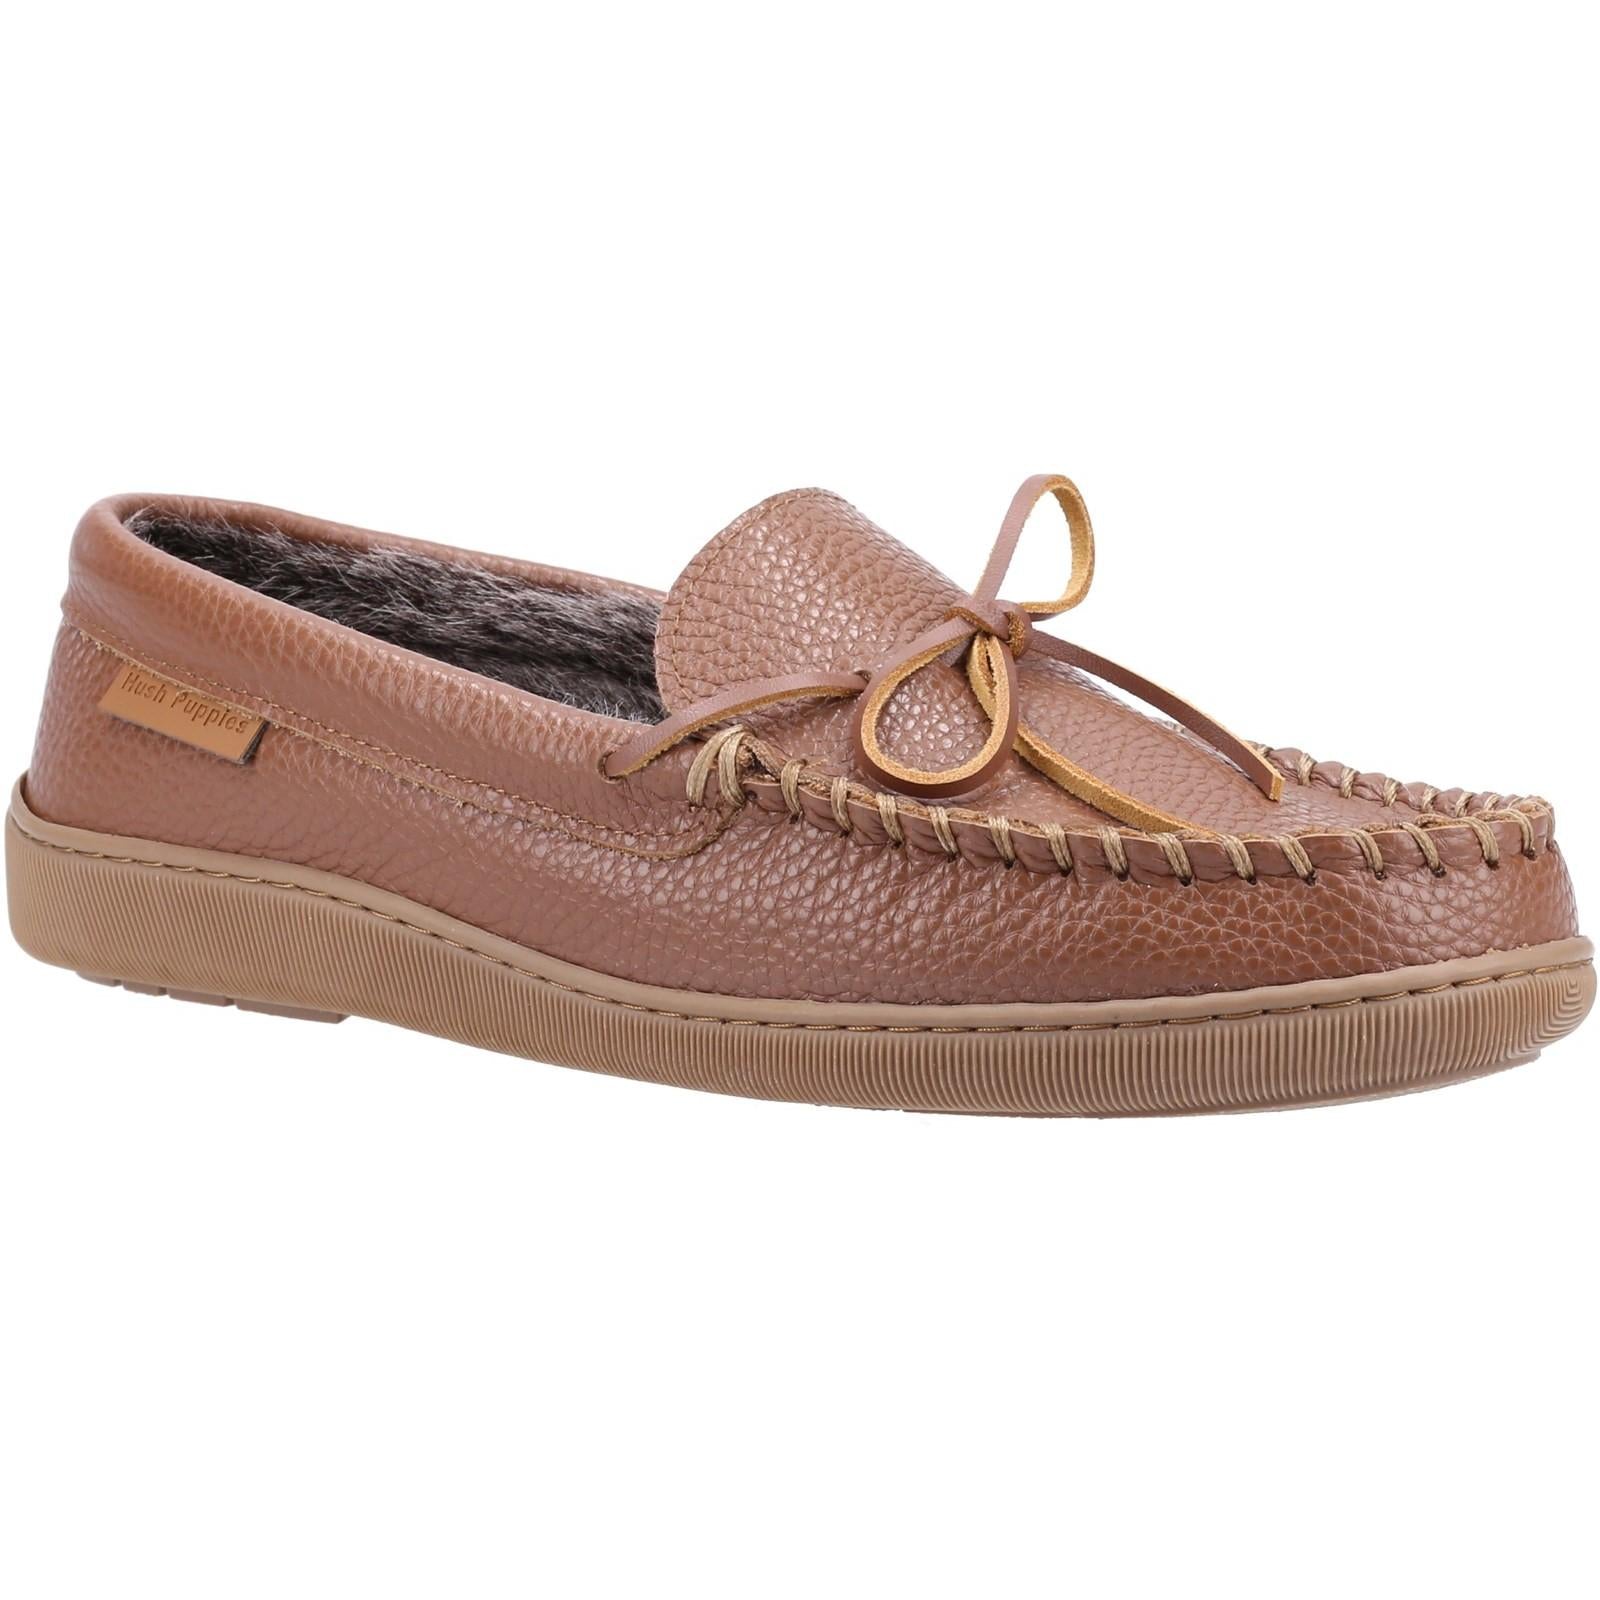 Hush Puppies Ace Leather Slipper